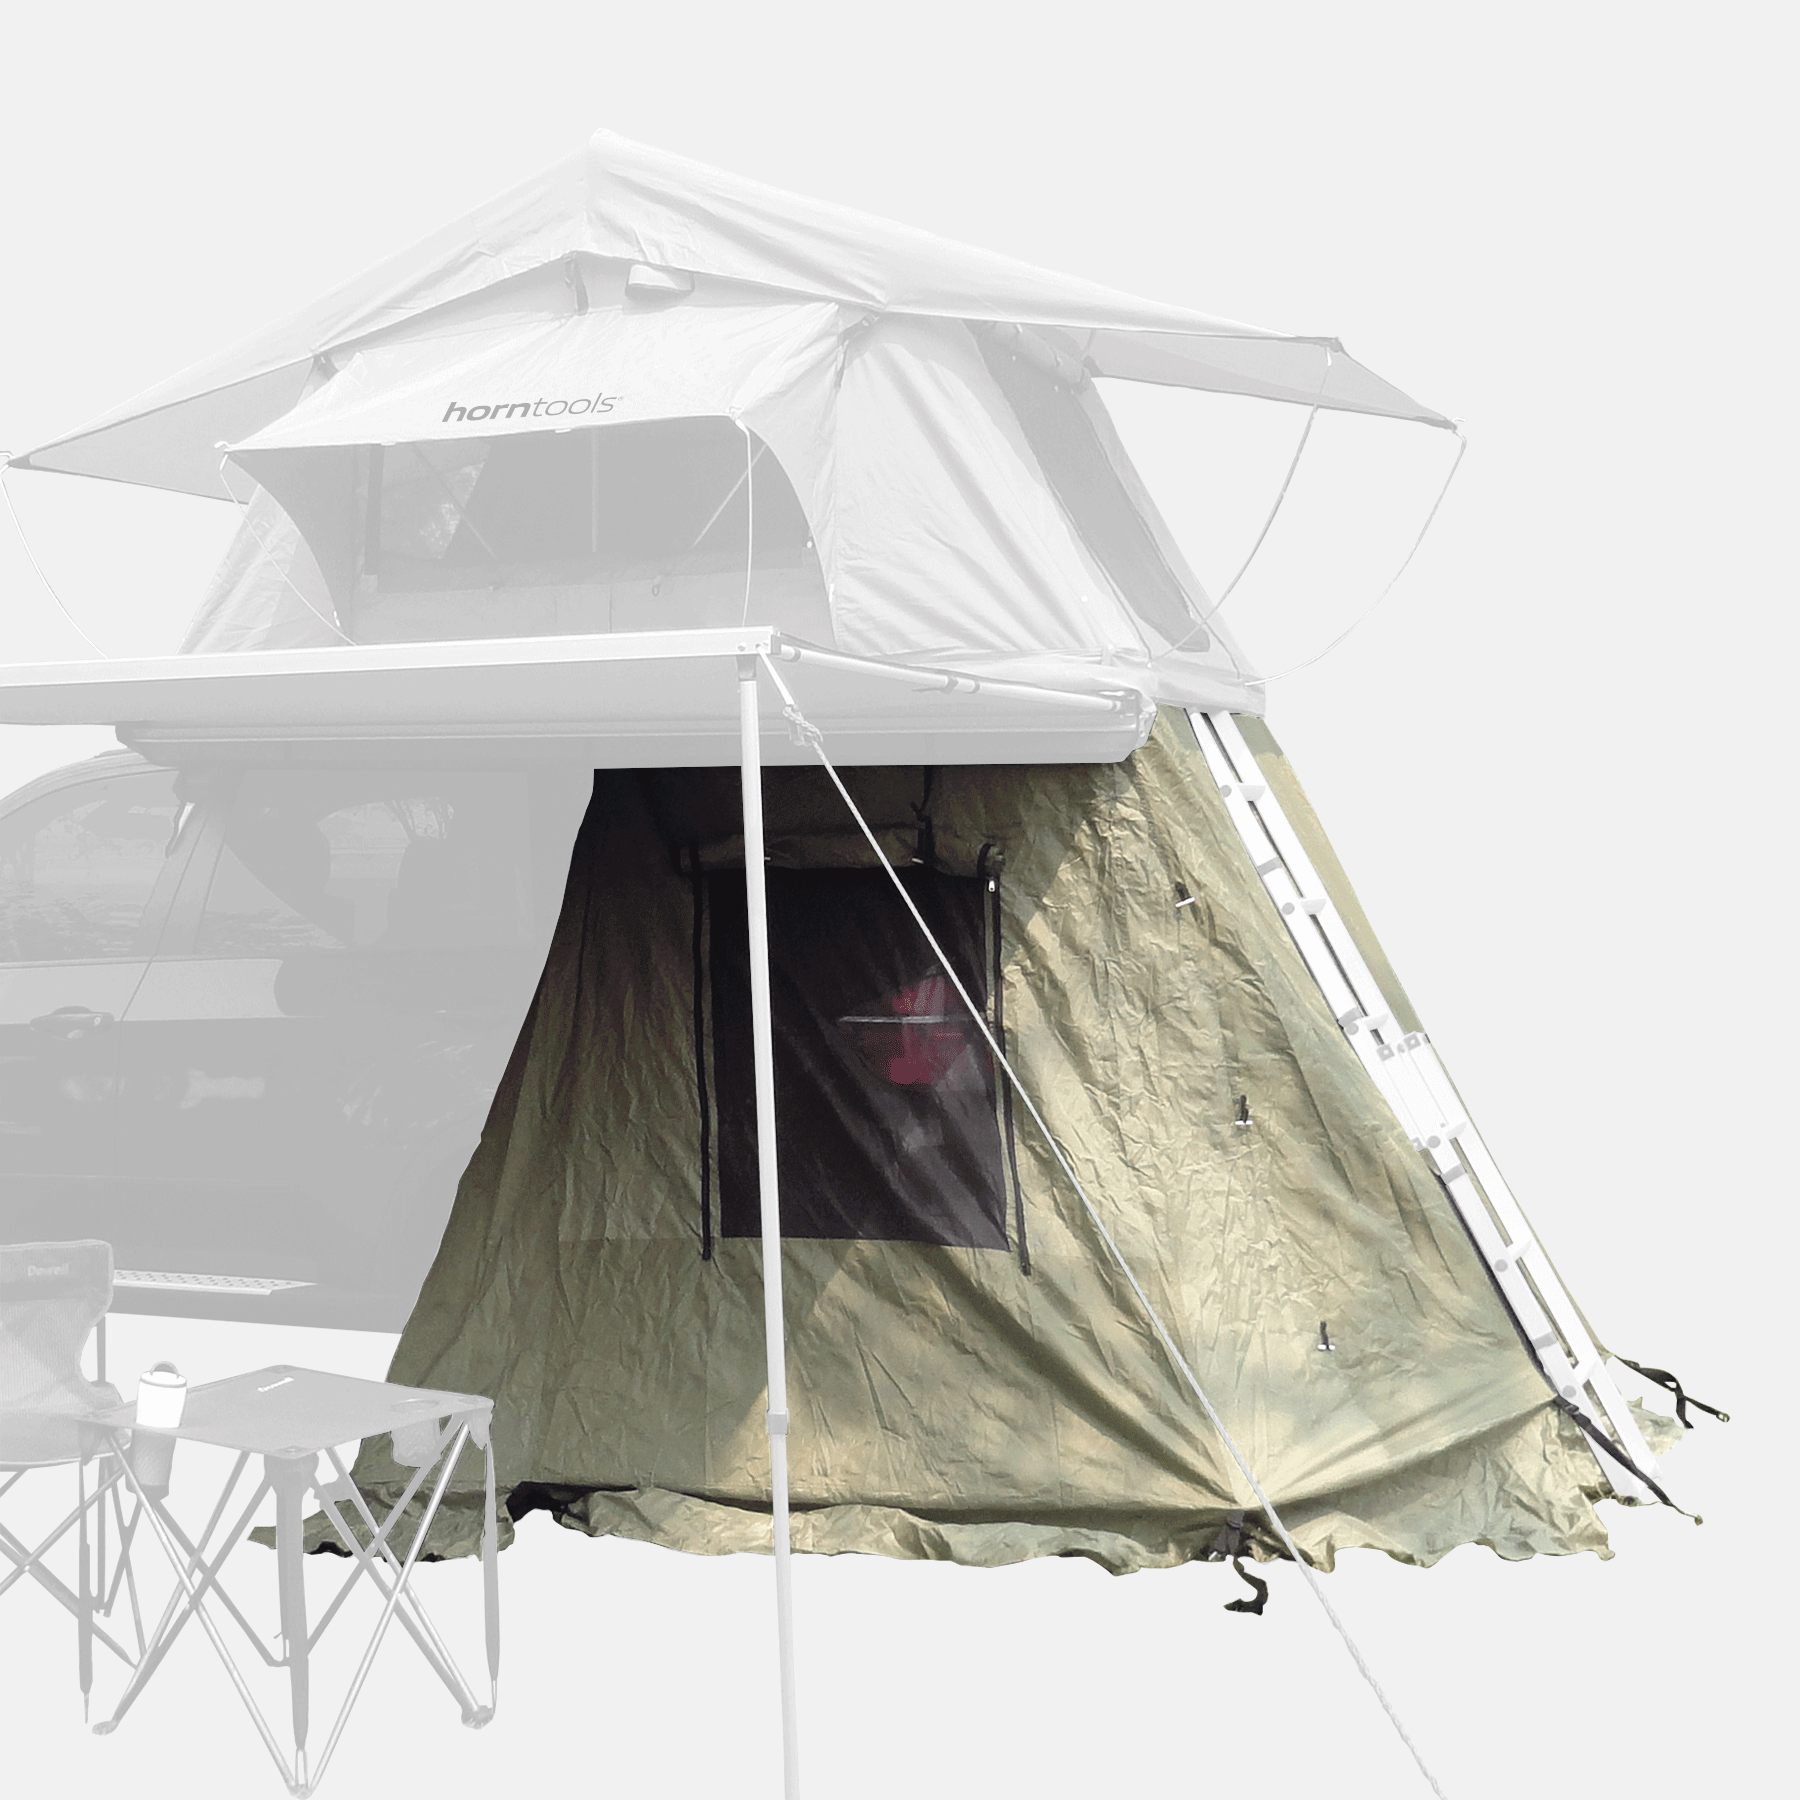 Annex room for roof tent Trapper Joe 140cm